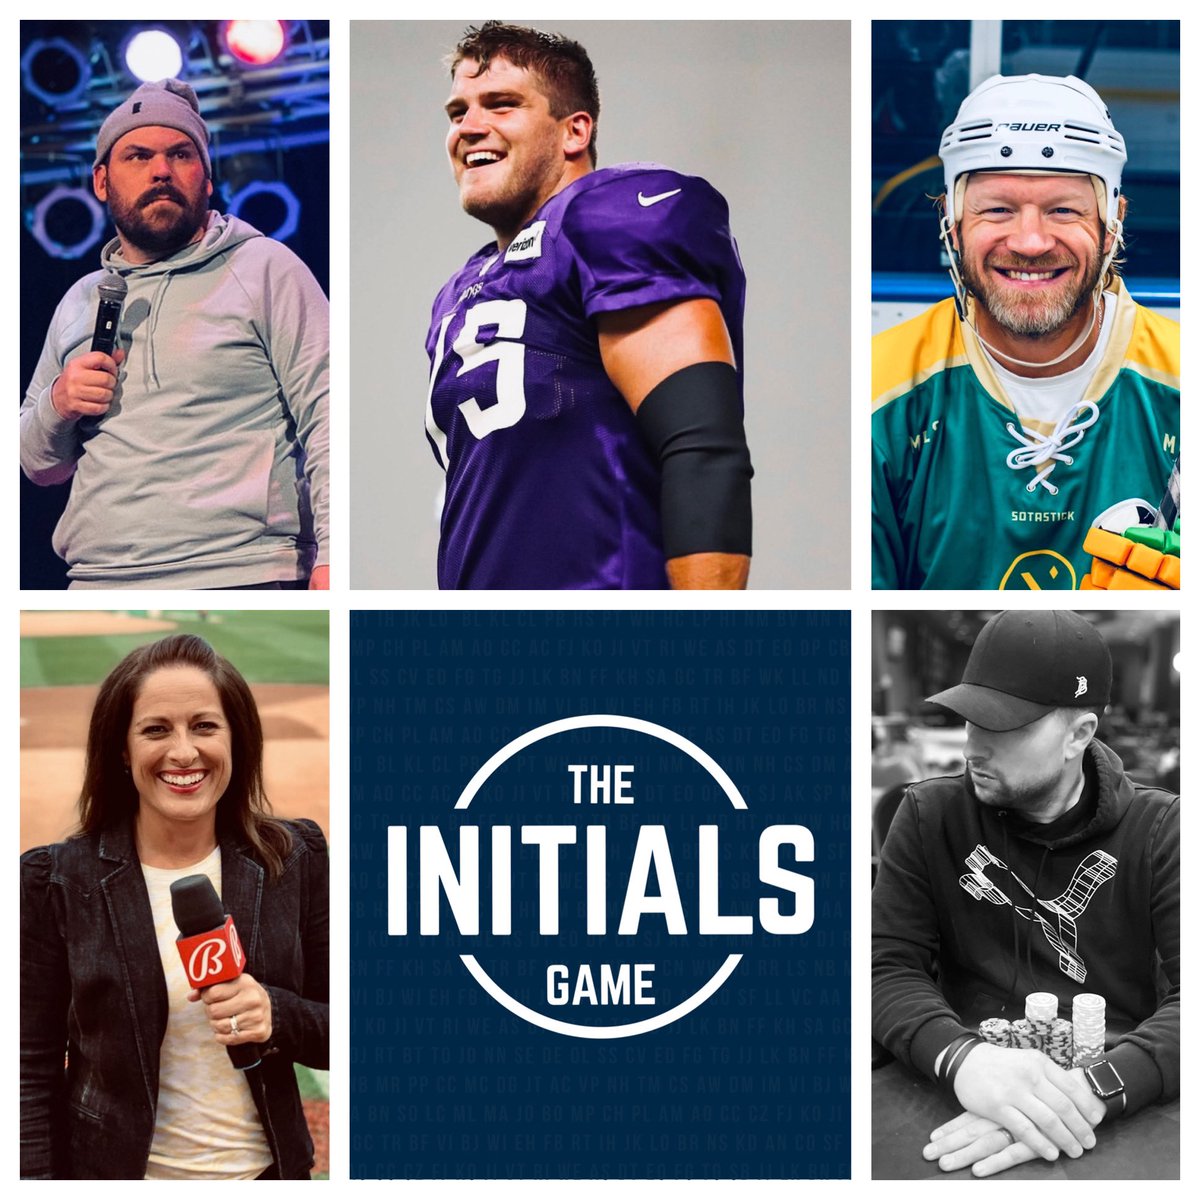 FRIDAY: @InitialsGame #513 on the @PowerTripKFAN at 8:15. @CoryCove hosts as @MeatSauce1, @MarneyGellner, @MarkDParrish and @Vikings Pro Bowl tackle @brian_oneill_ battle for the win. LISTEN HERE: KFAN.com/listen